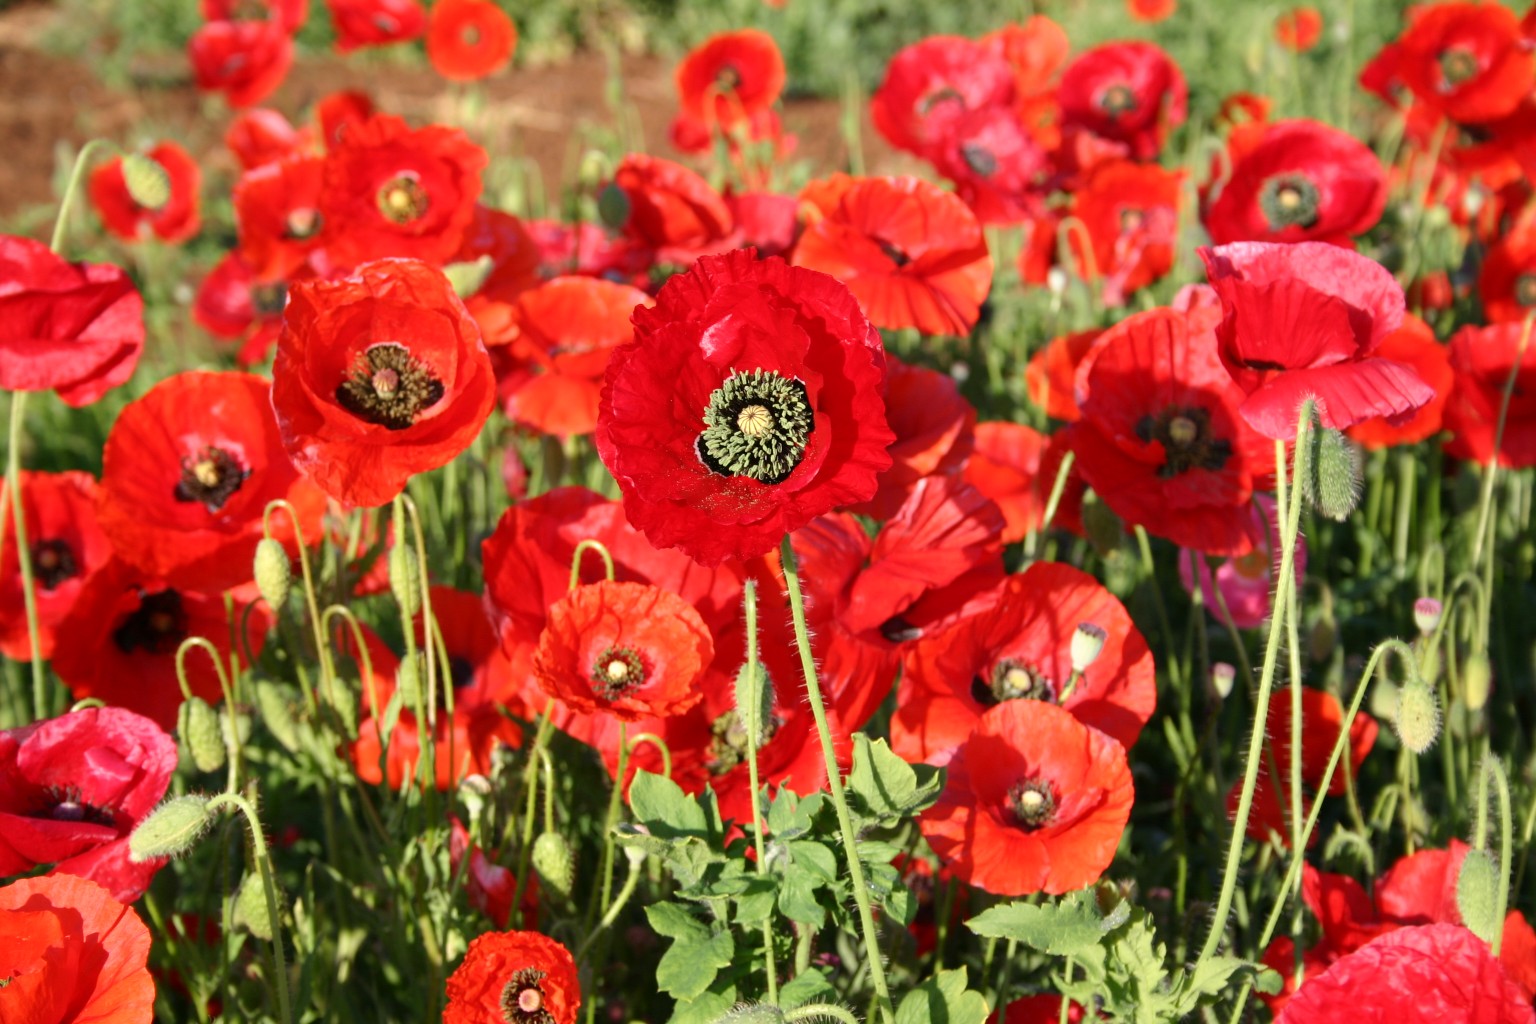 Red poppy (Papaver rhoeas), ammonia and acetic acid